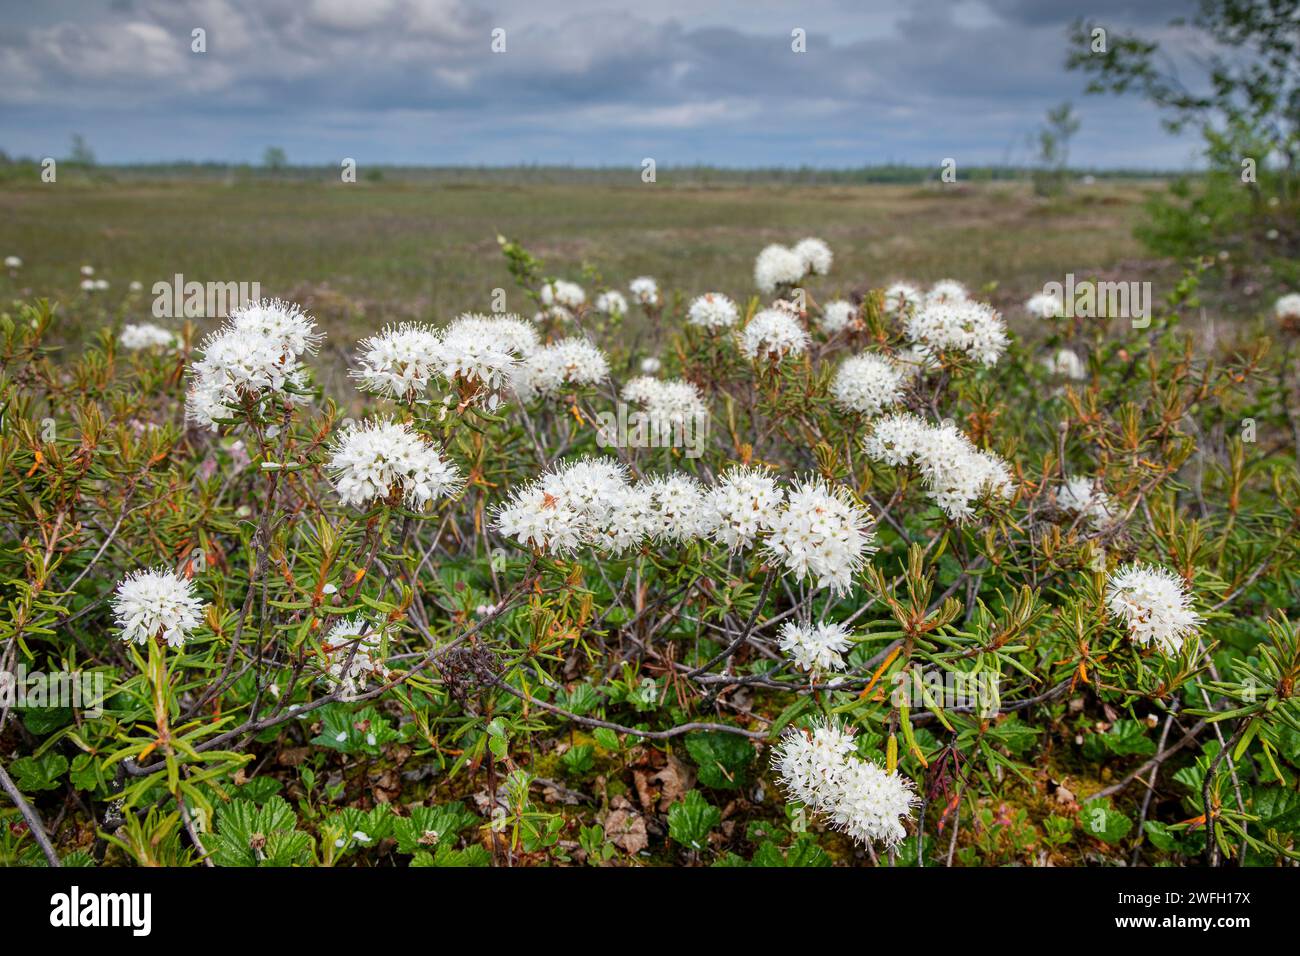 Wild Rosemary, Marsh Labrador tea, northern Labrador tea (Ledum palustre, Rhododendron tomentosum, Rhododendron palustre), blooming in a mire, Finland Stock Photo